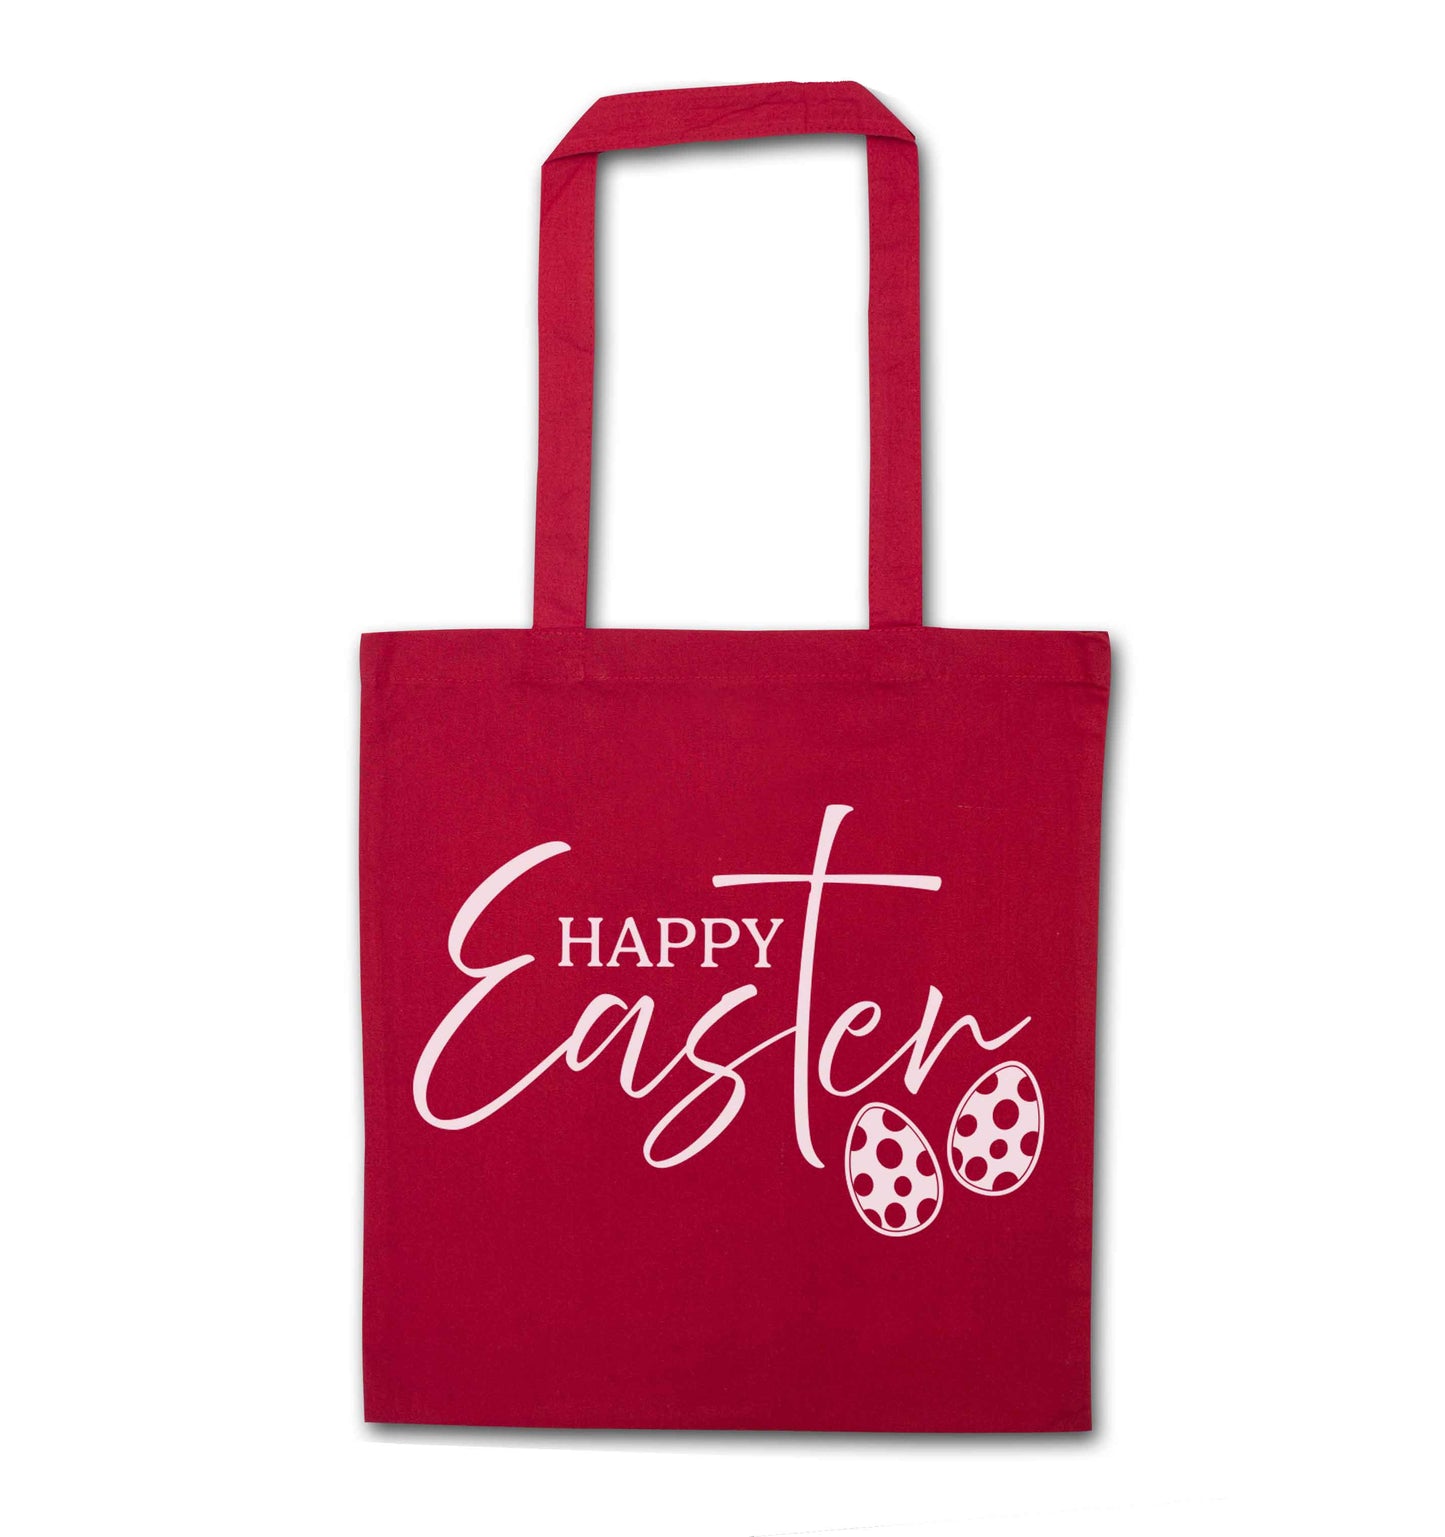 Happy Easter red tote bag